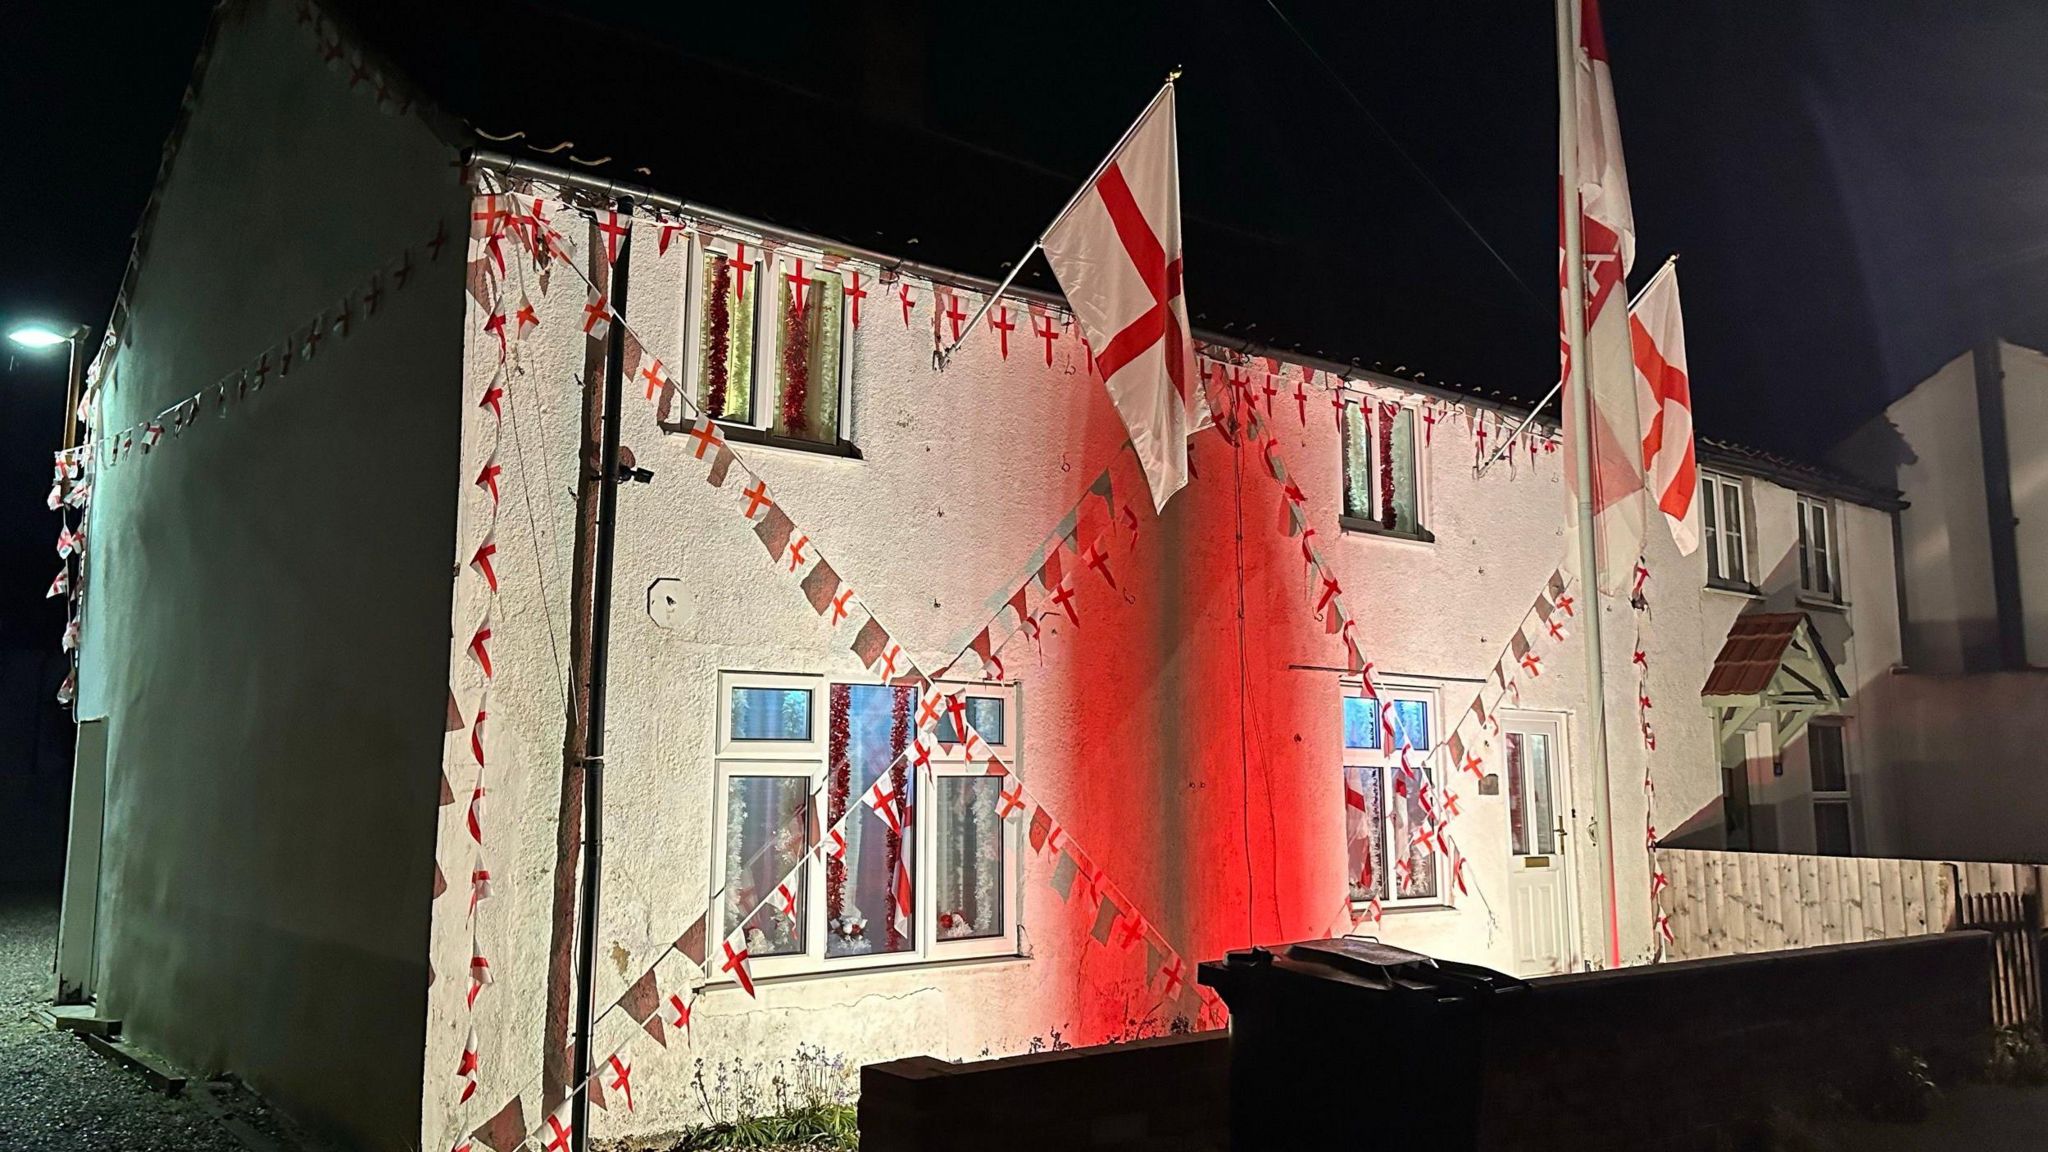 The house with a red spotlight on it